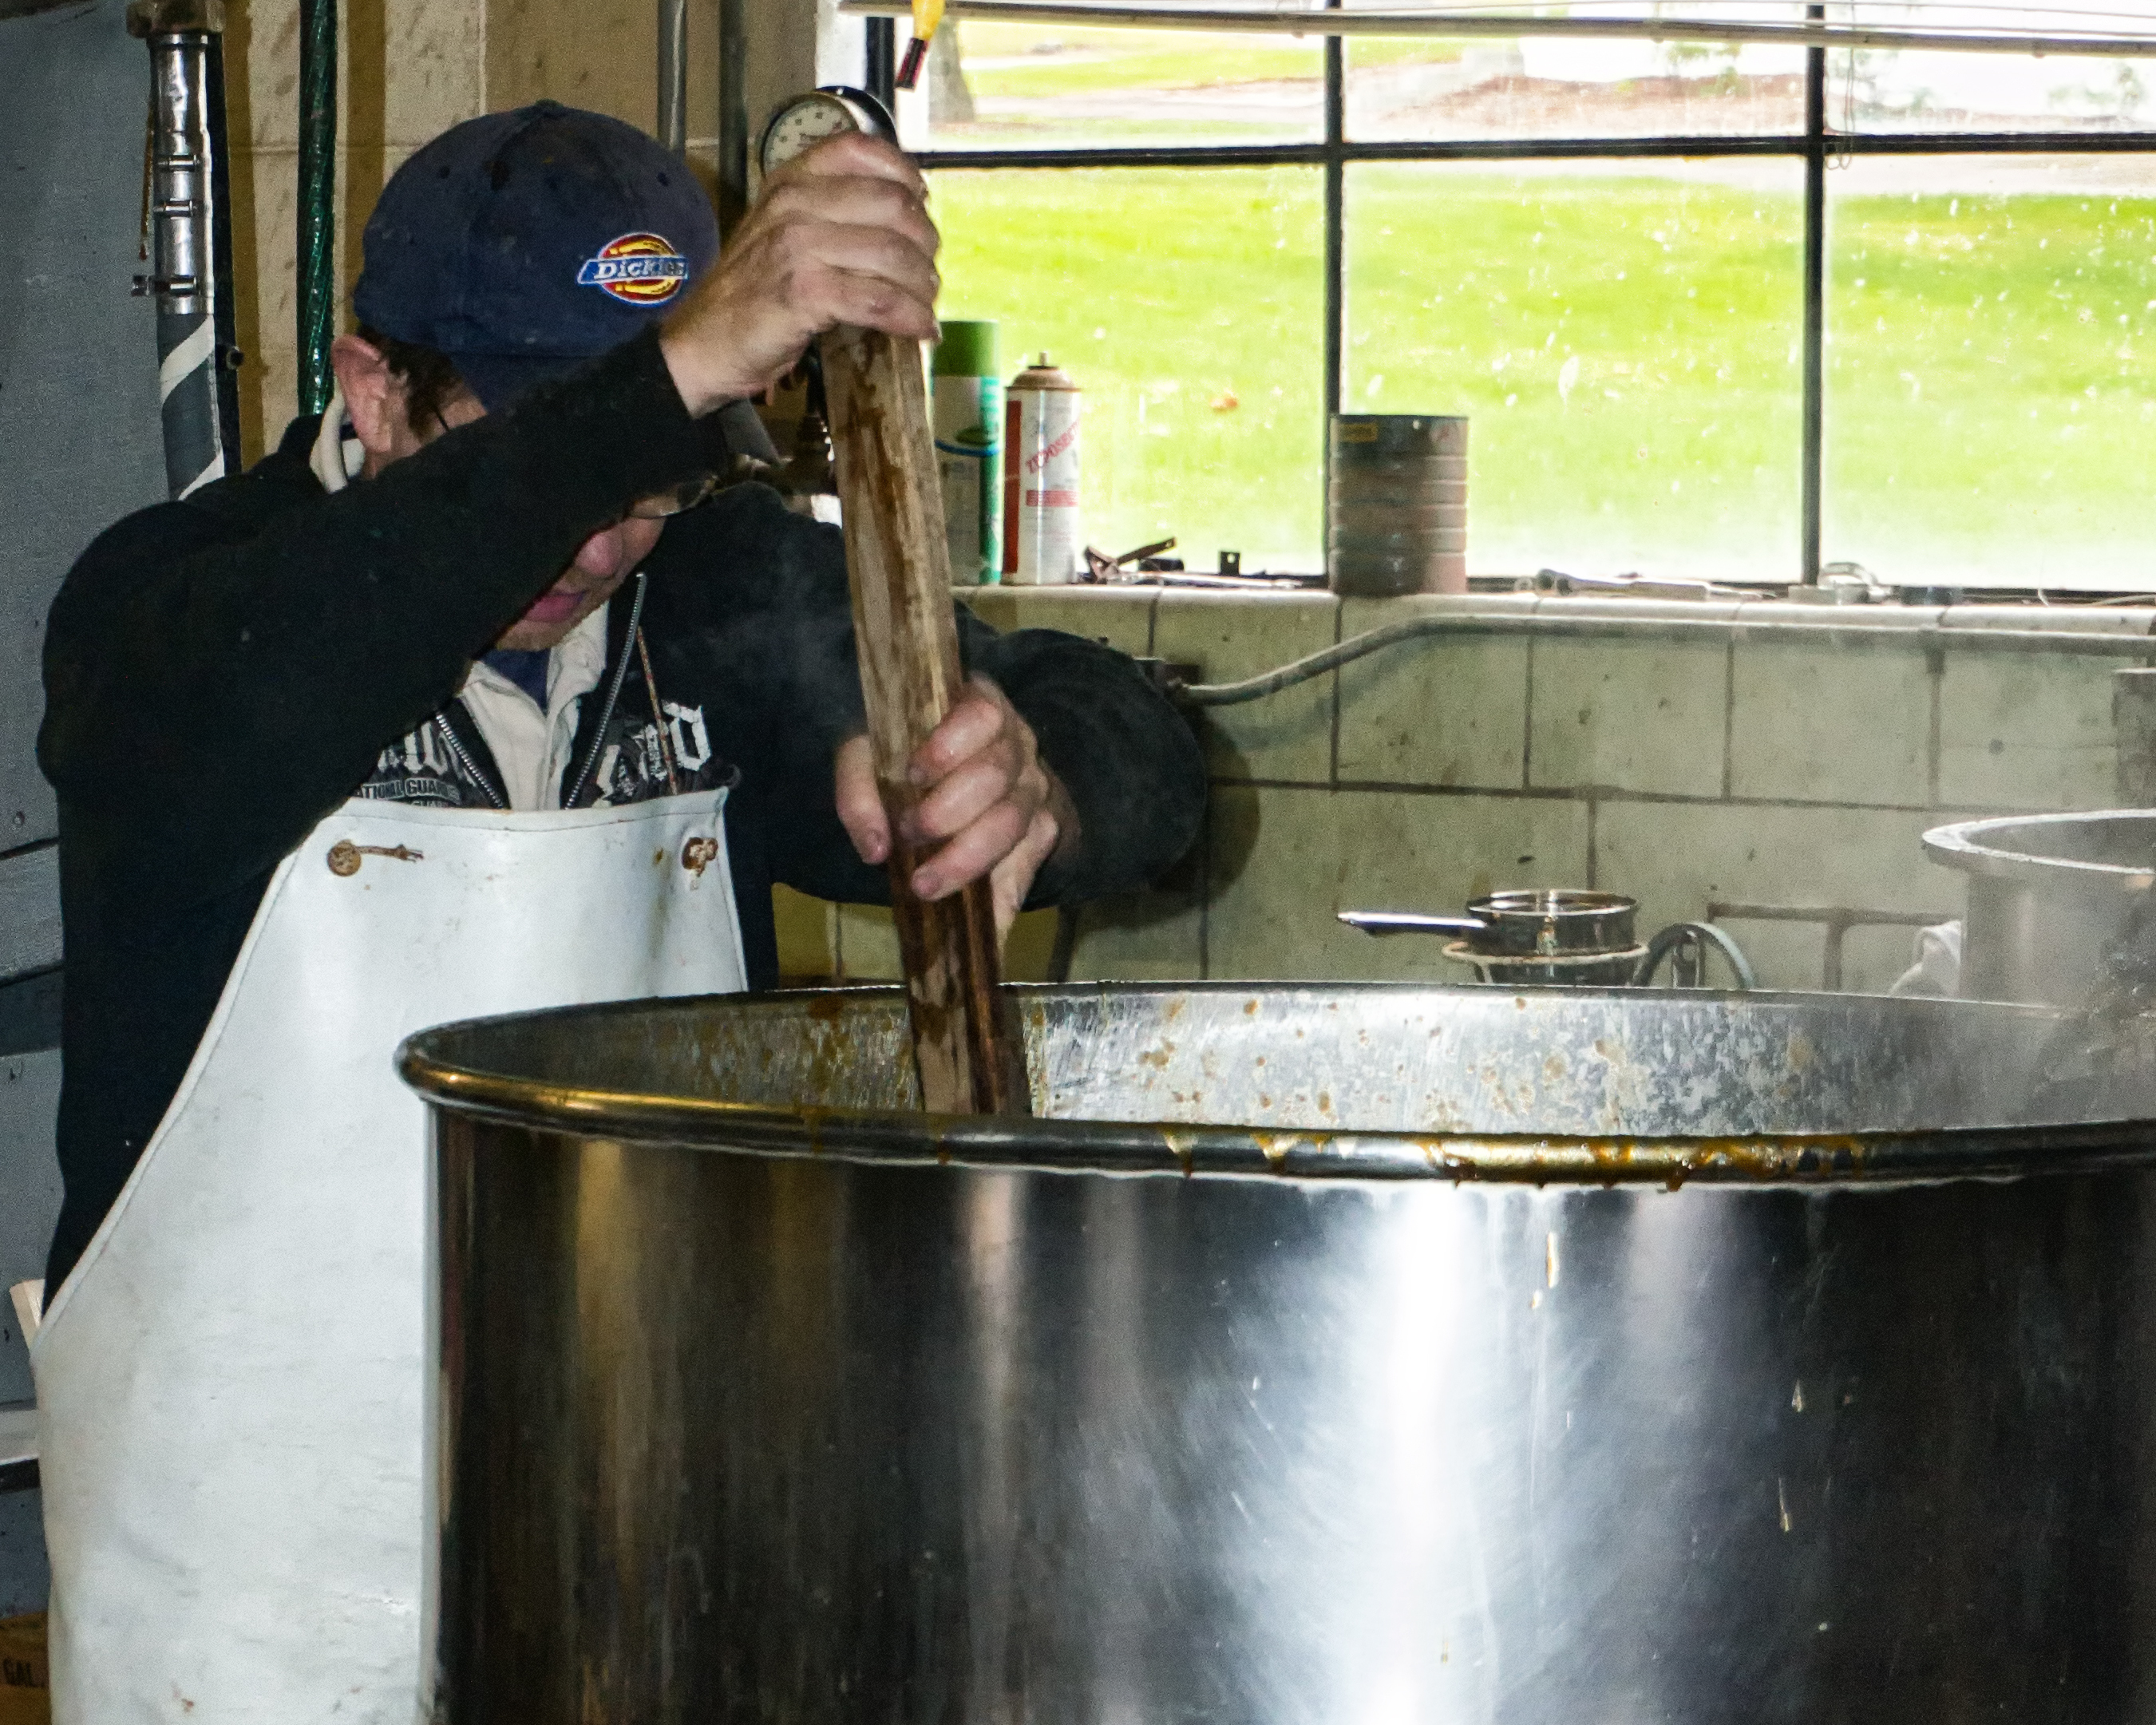 Cooking the apple butter